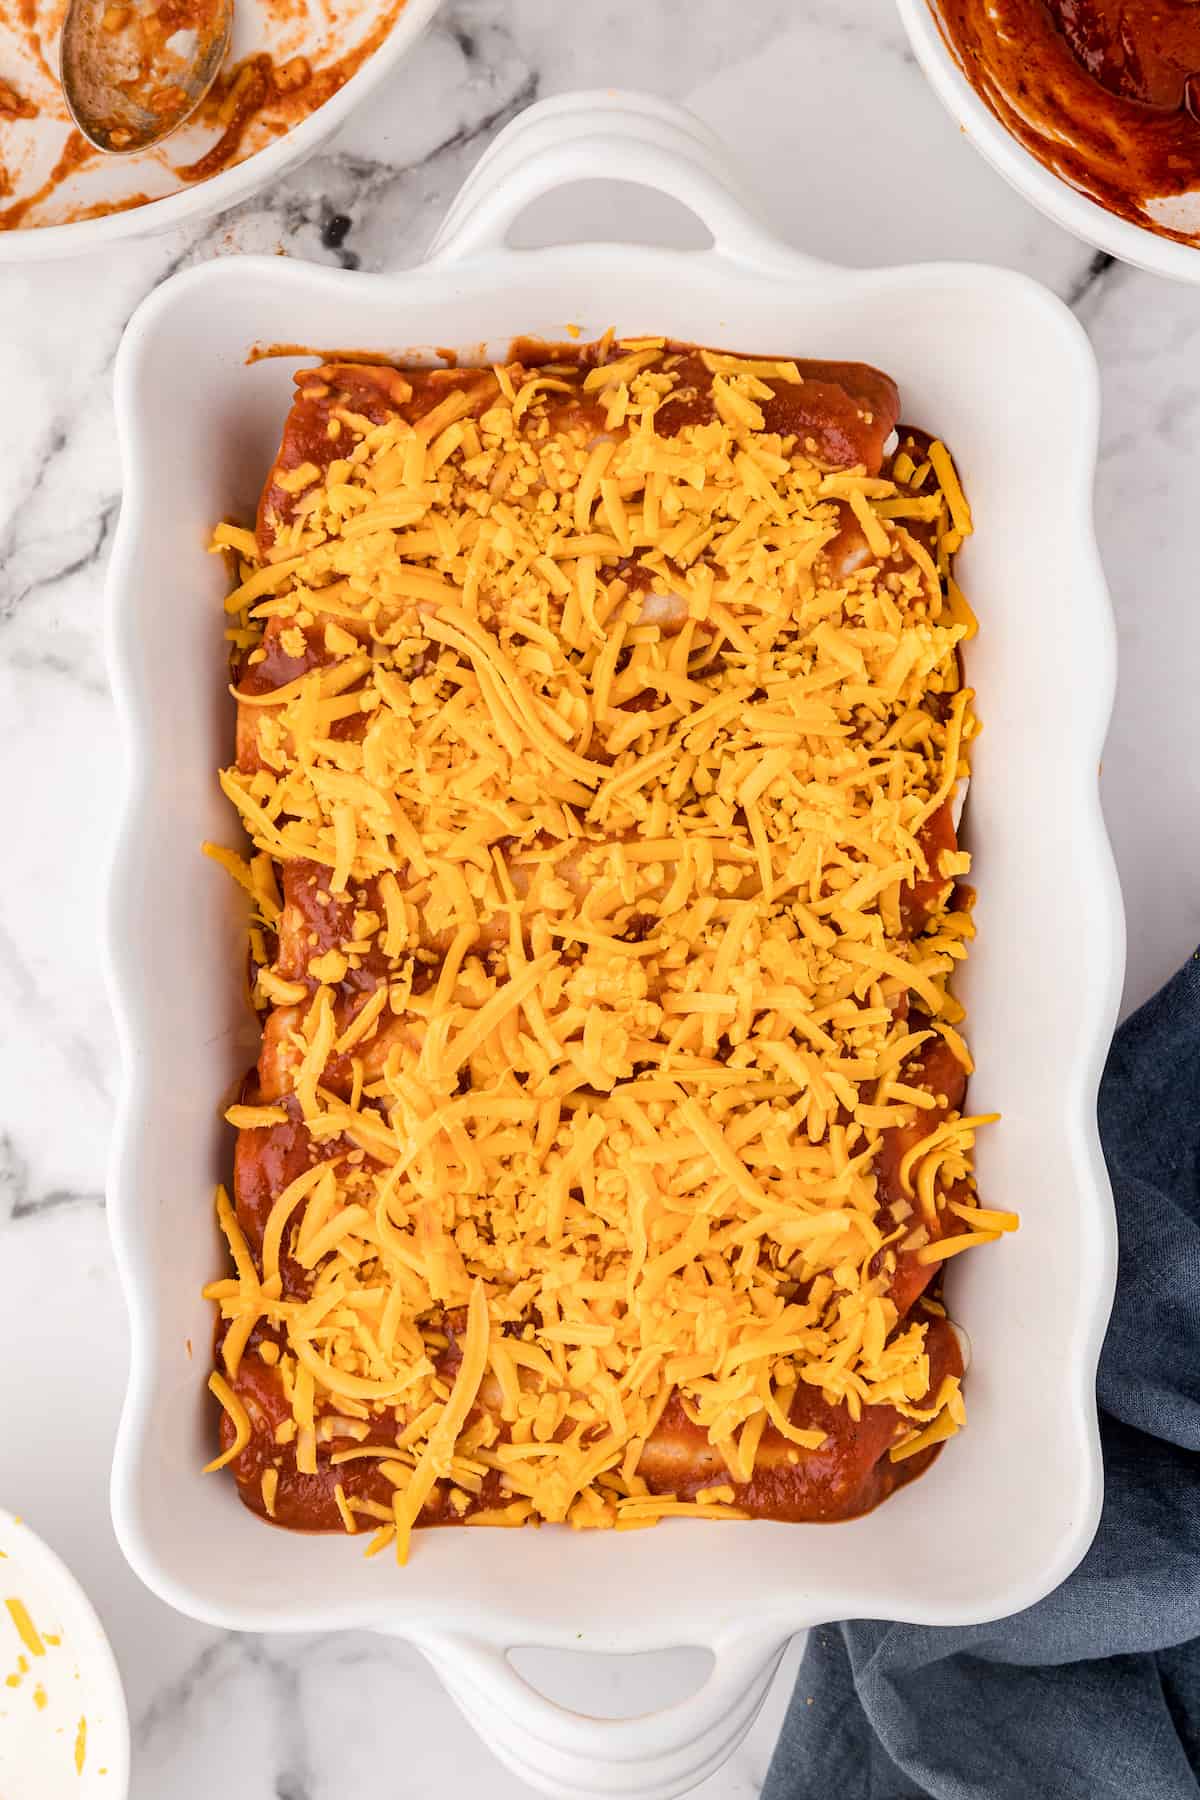 sprinkle the BBQ chicken enchiladas with shredded cheese